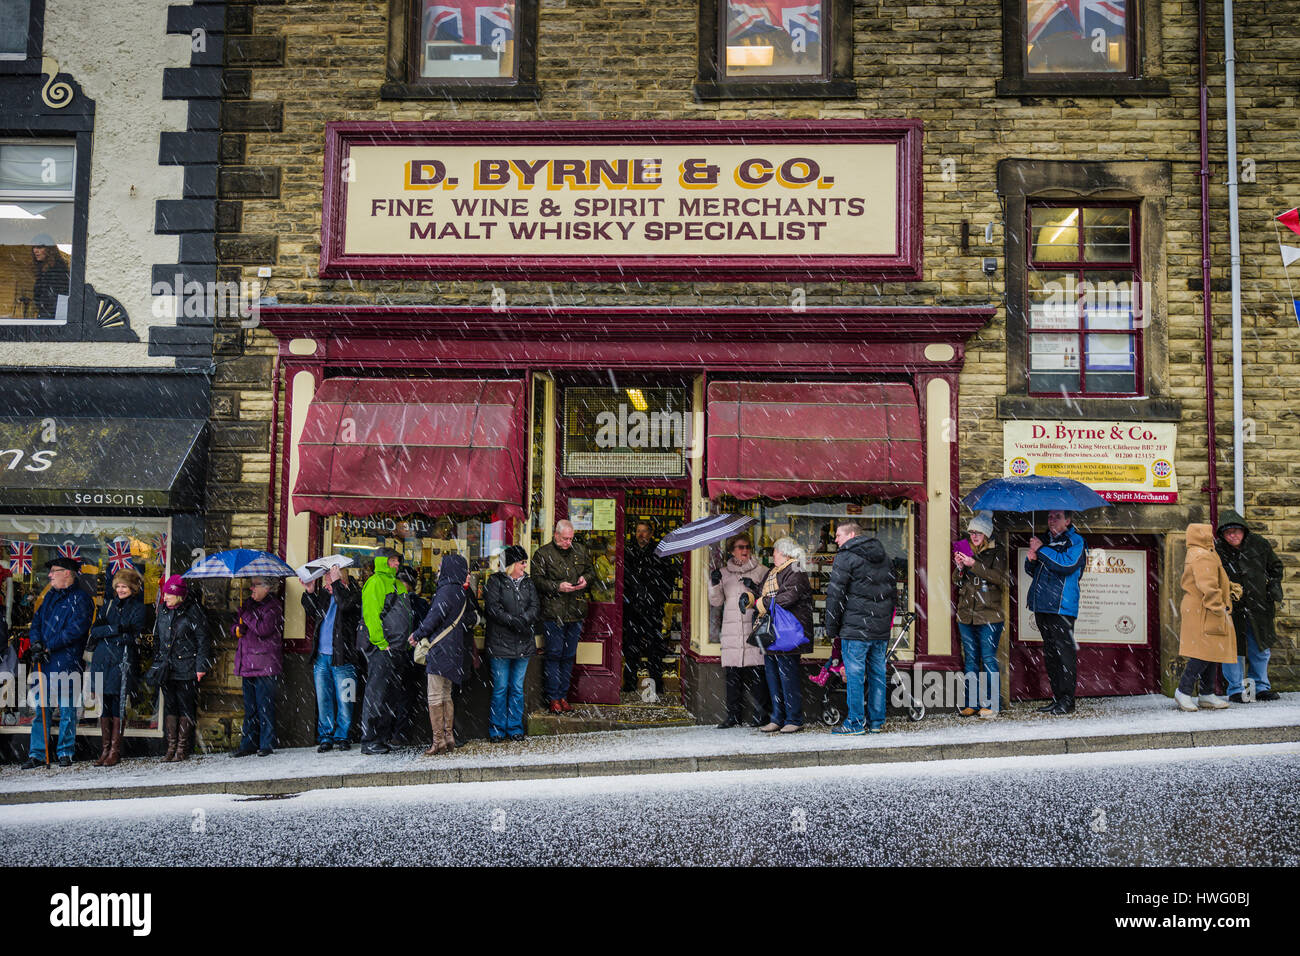 Clitheroe, UK. 21st Mar, 2017. Royal visit by HRH Prince Charles to Clitheroe to see local retailers that support the town's food festival - held later in the year. This image local residents await the arrival of the Prince despite the poor weather conditions, at Byrnes Wine Merchants. Credit: STEPHEN FLEMING/Alamy Live News Stock Photo